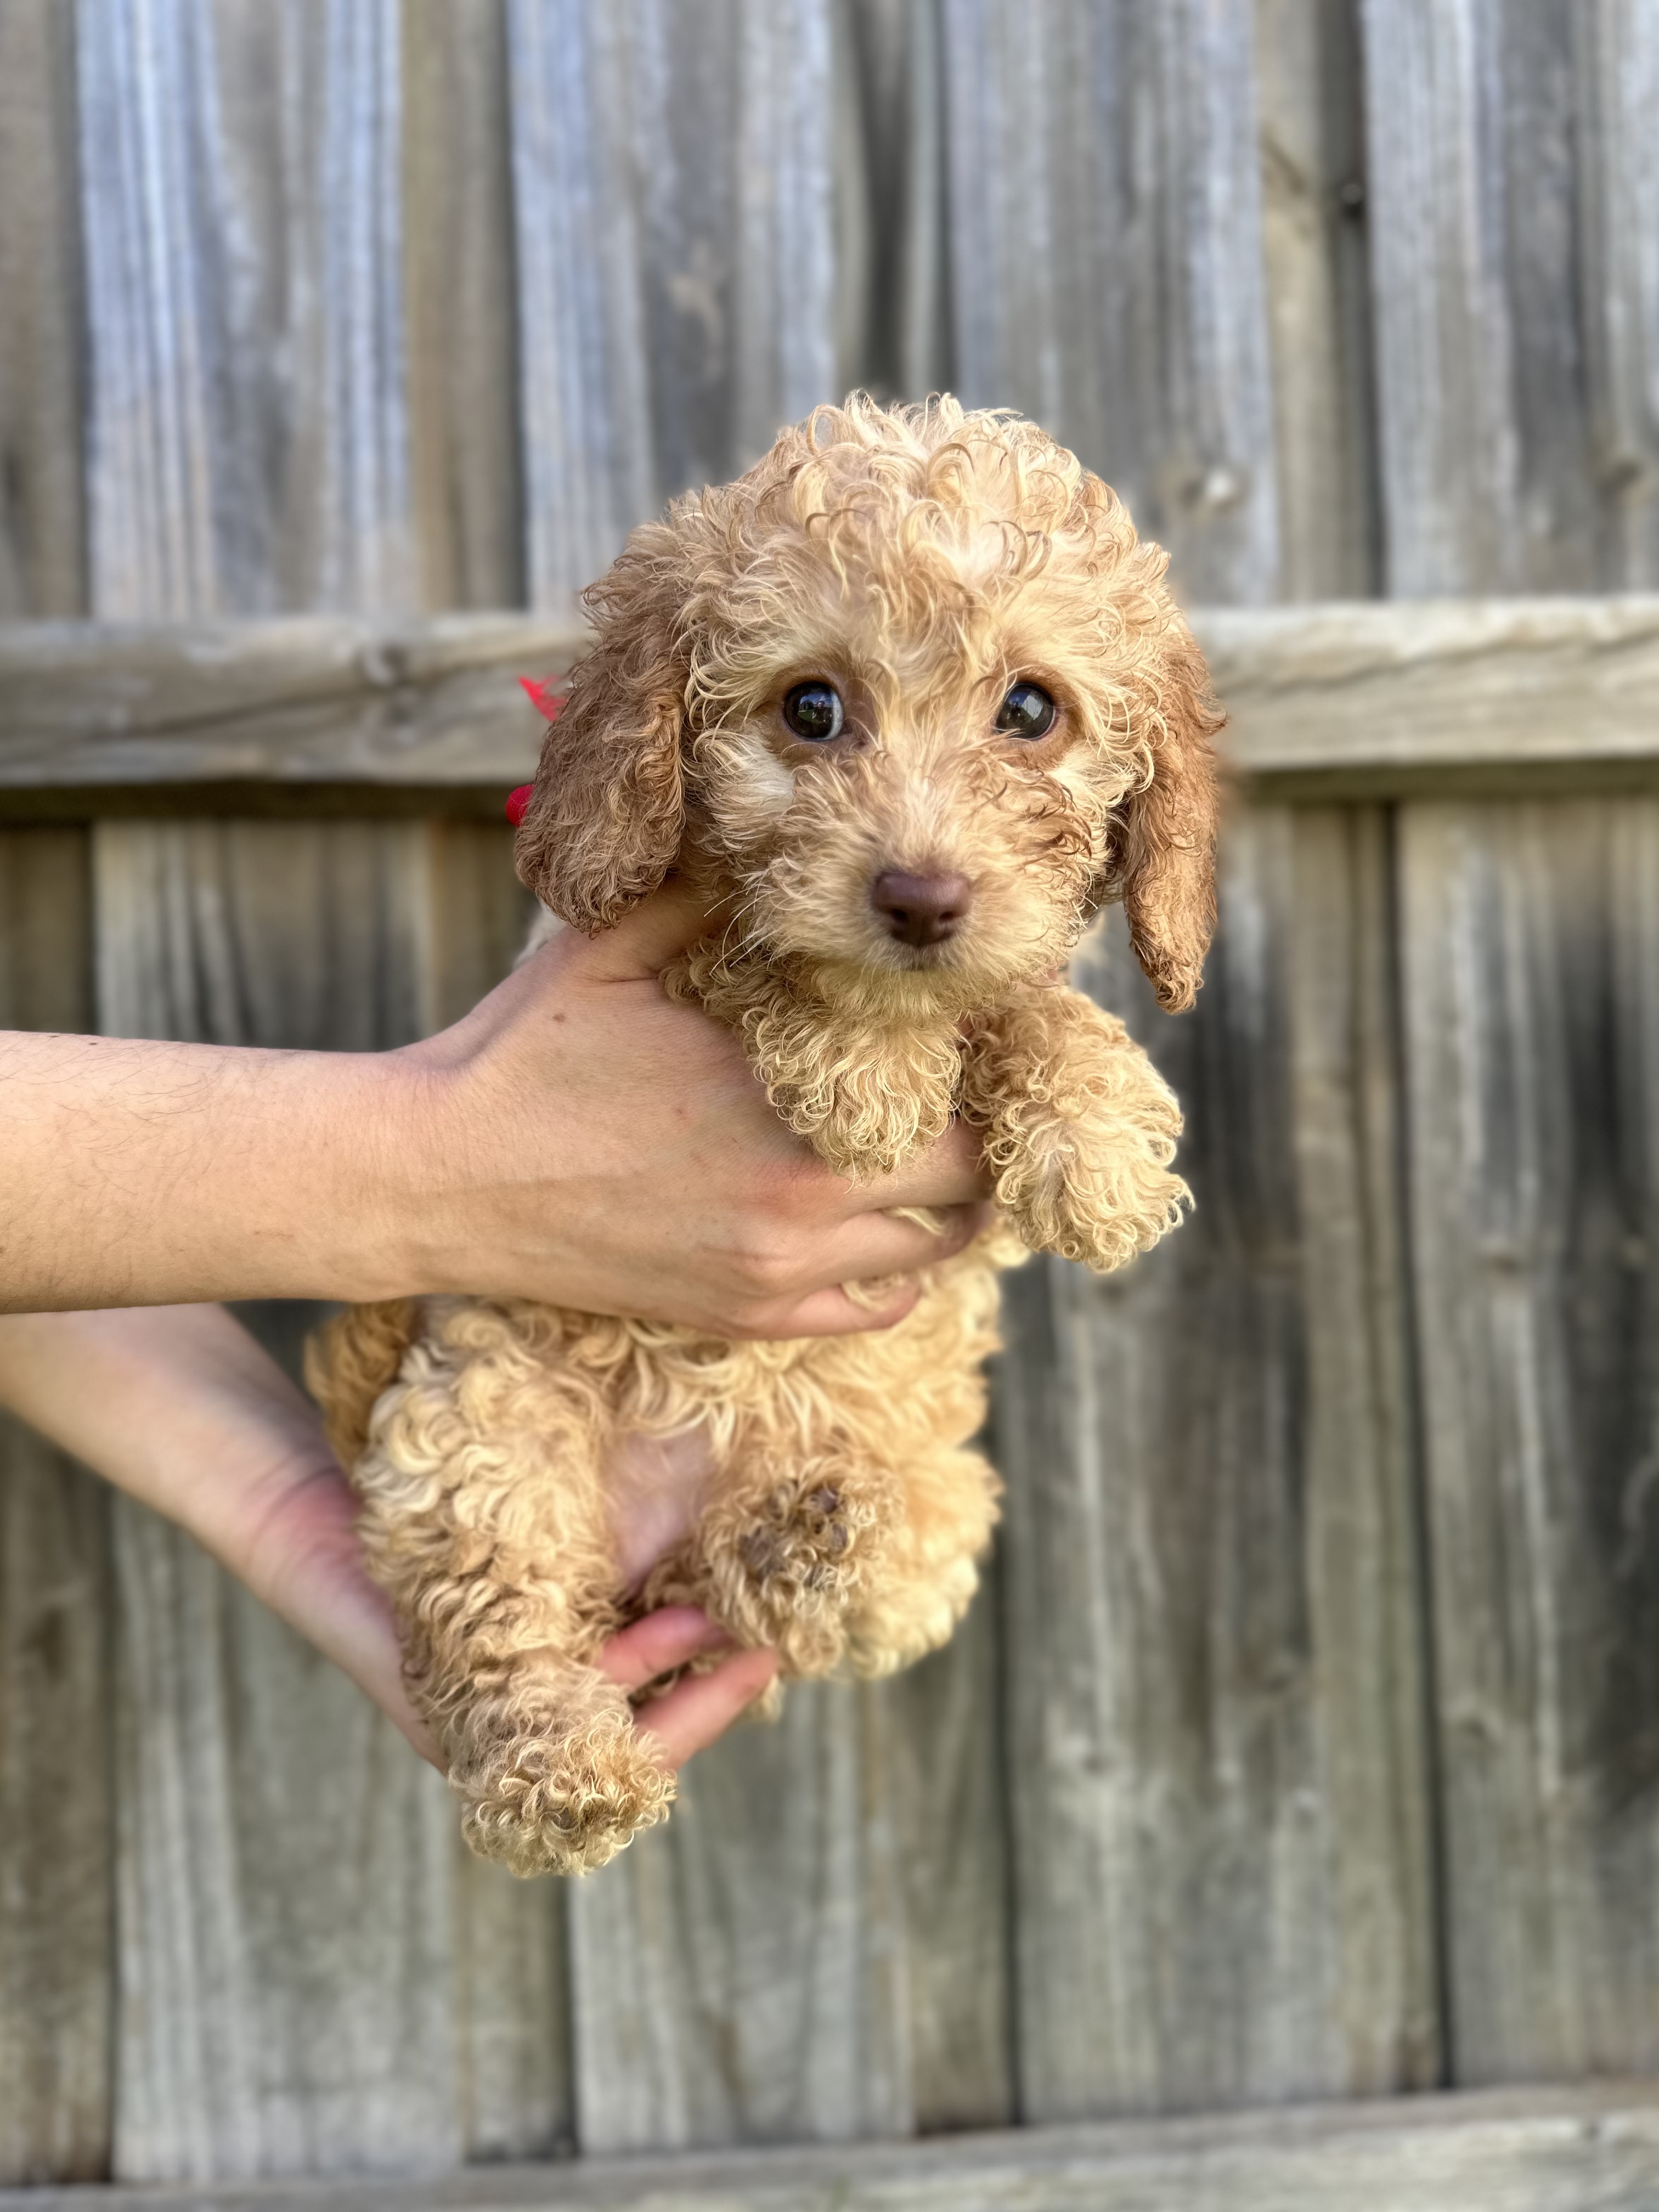 Cavoodle puppies, what a beautiful Xmas present …